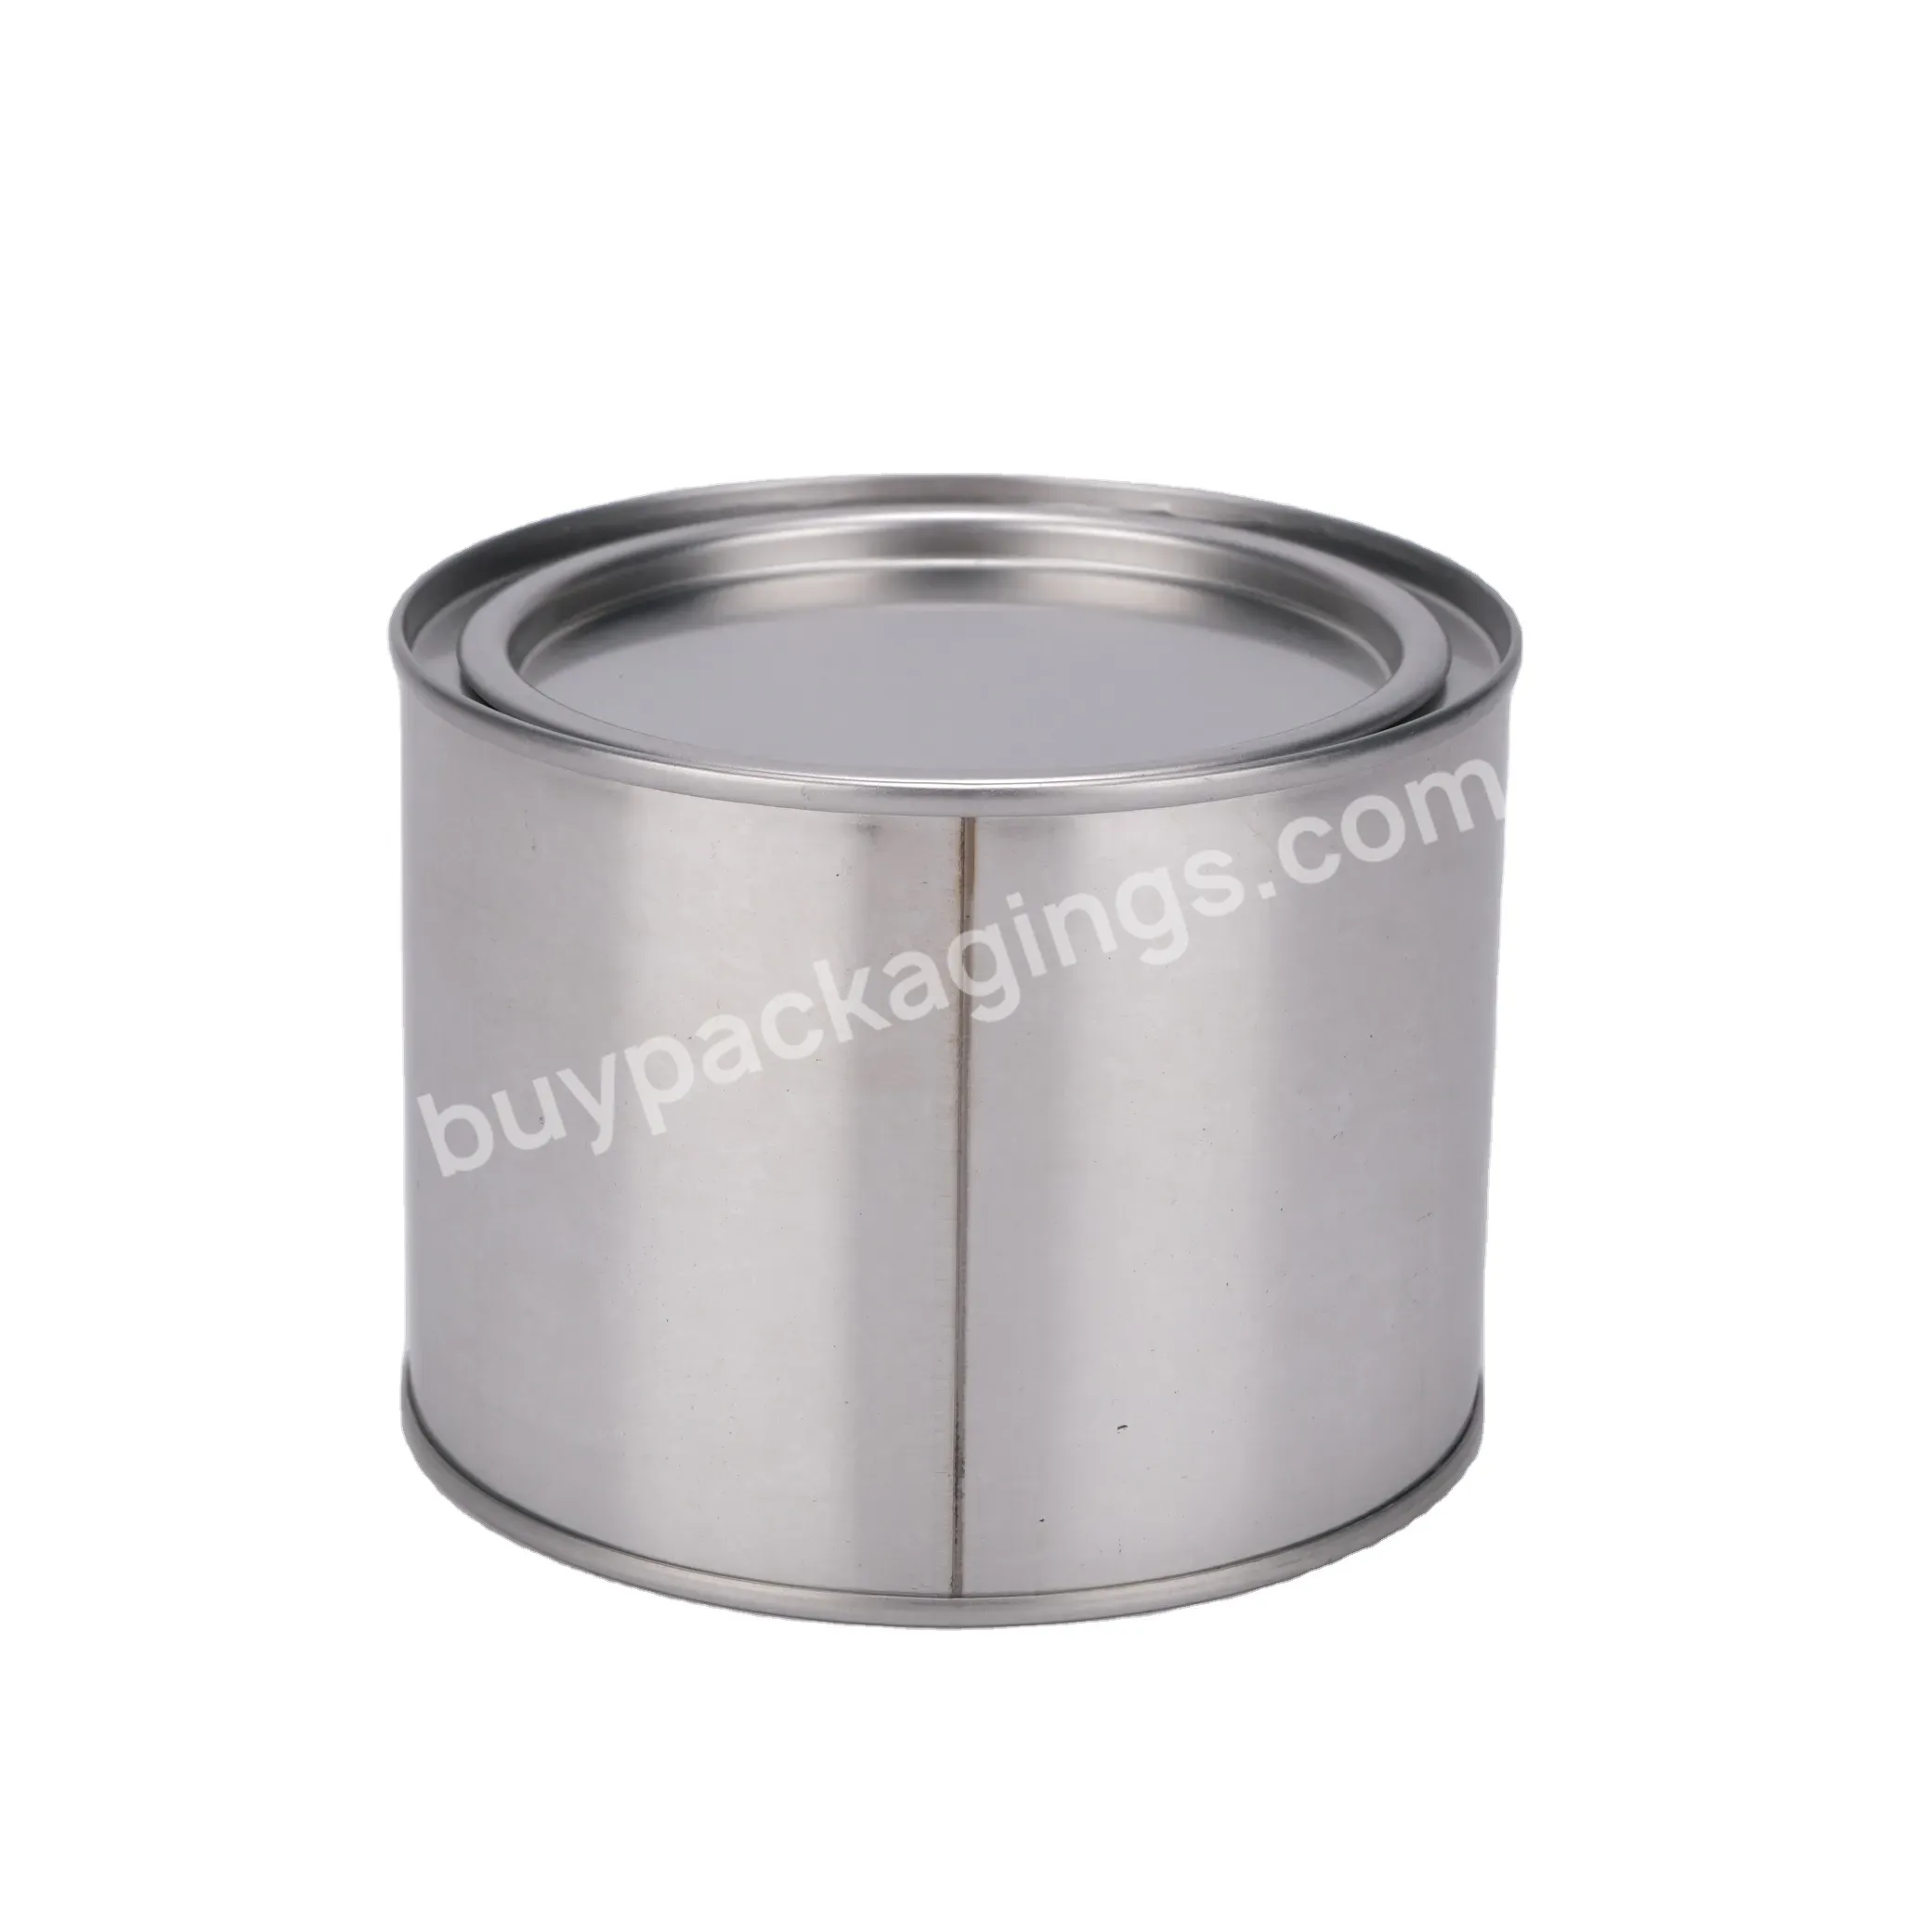 Chinese Factory Light Weight Large Capacity Empty Metal Packaging Tin Can For Food - Buy Metal Food Tin,Empty Food Tin Can,Tin Packaging For Food.